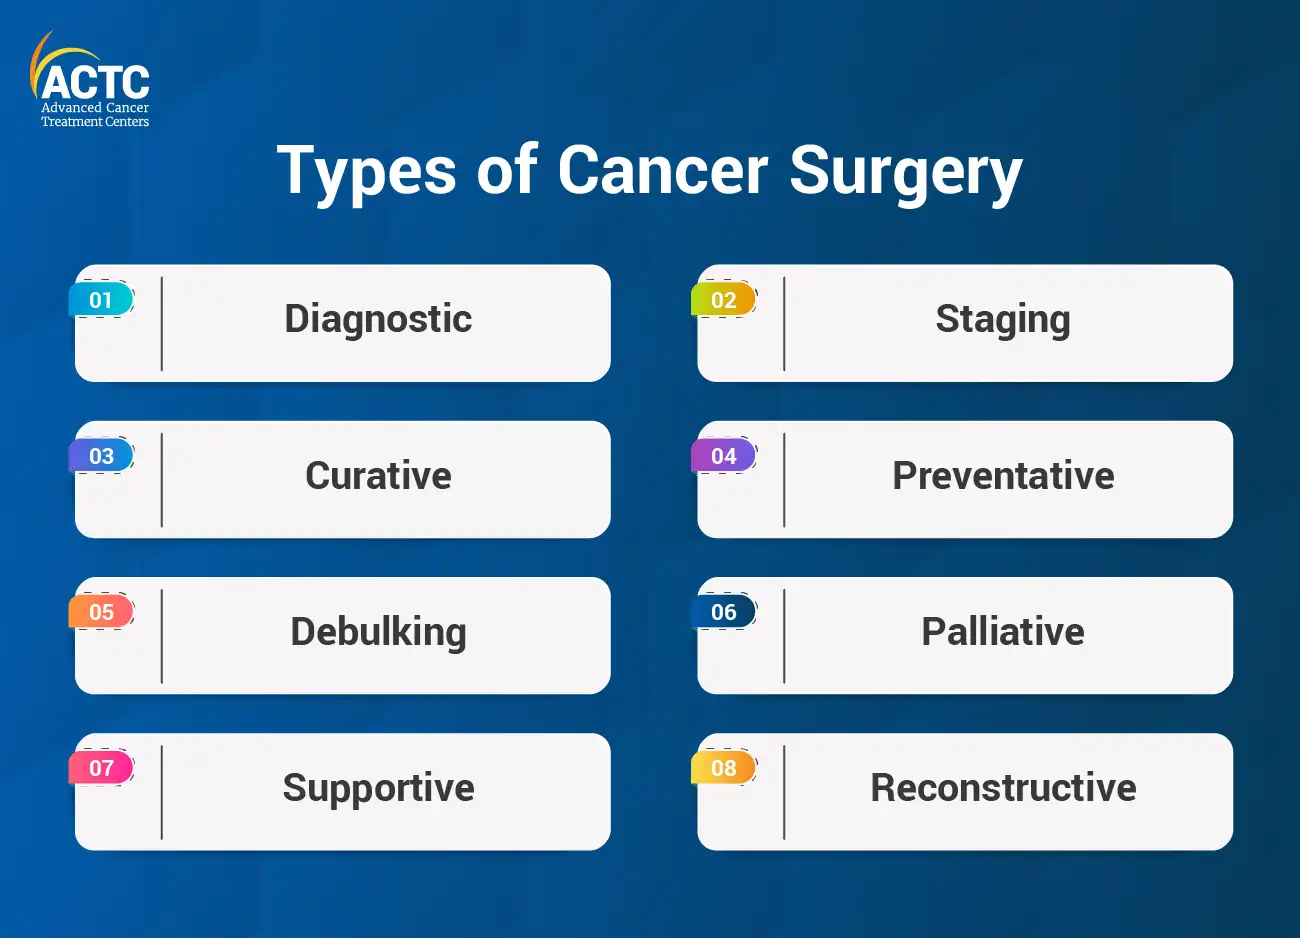 What Are the Different Types of Cancer Surgery?